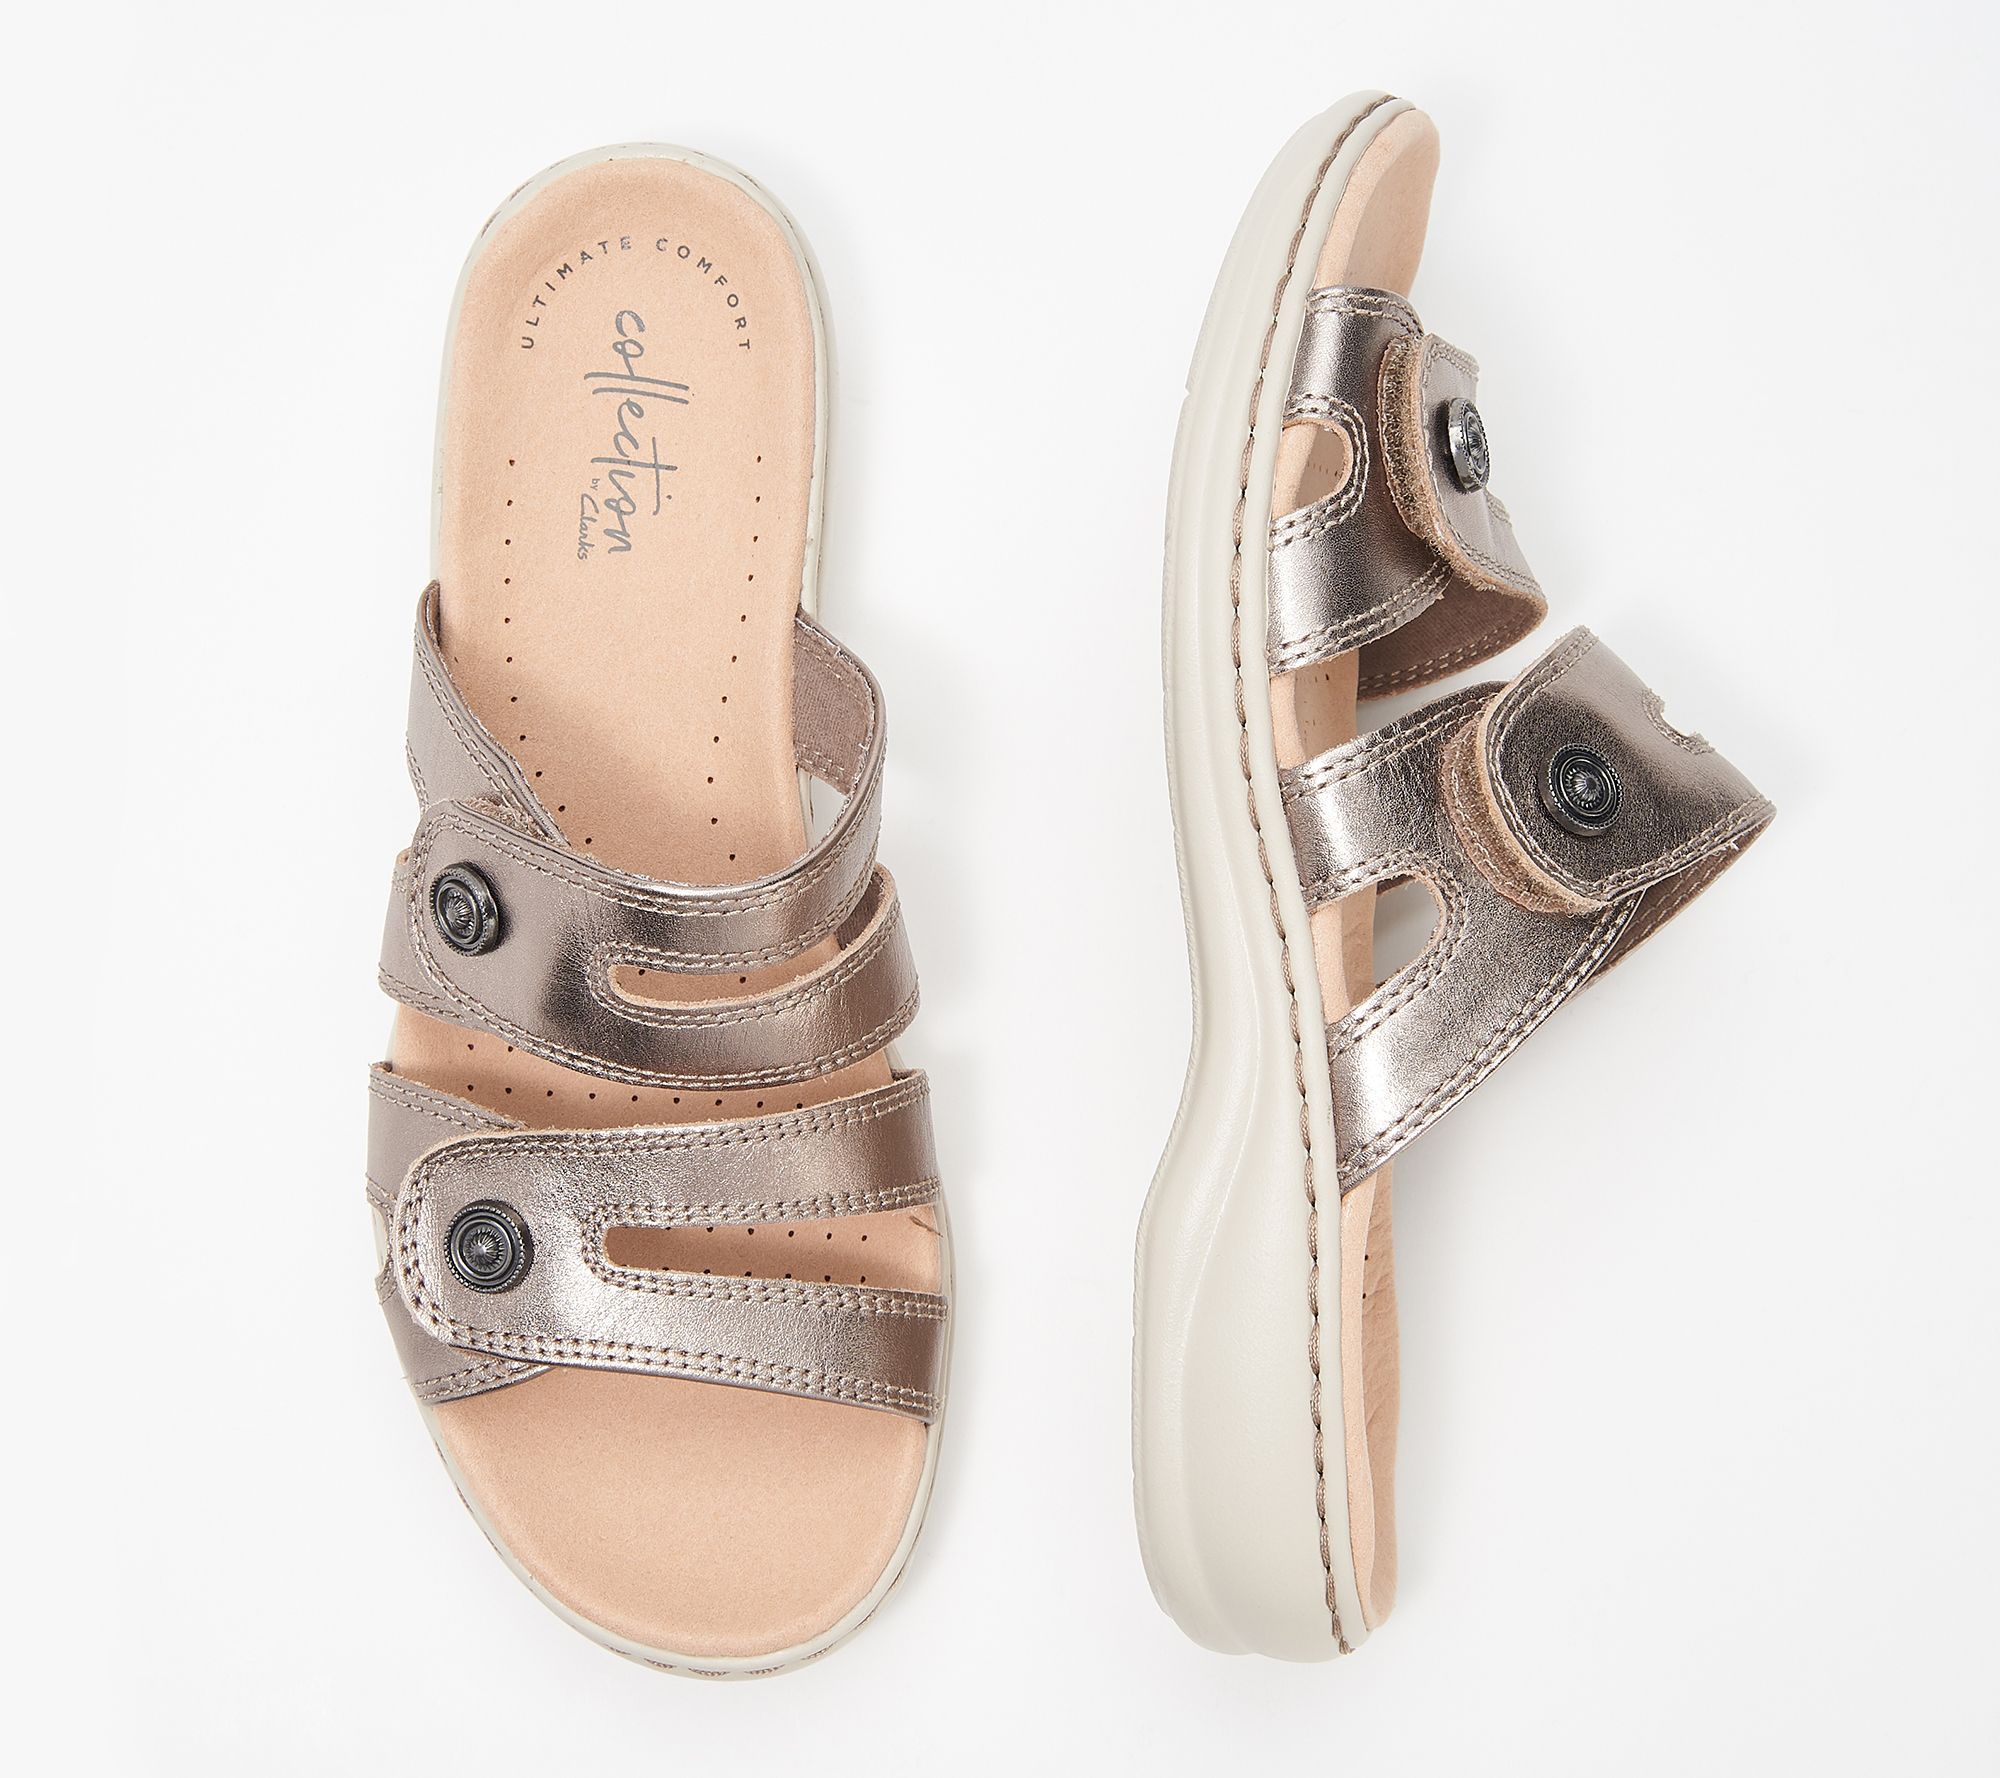 clarks sandals leisa lolly